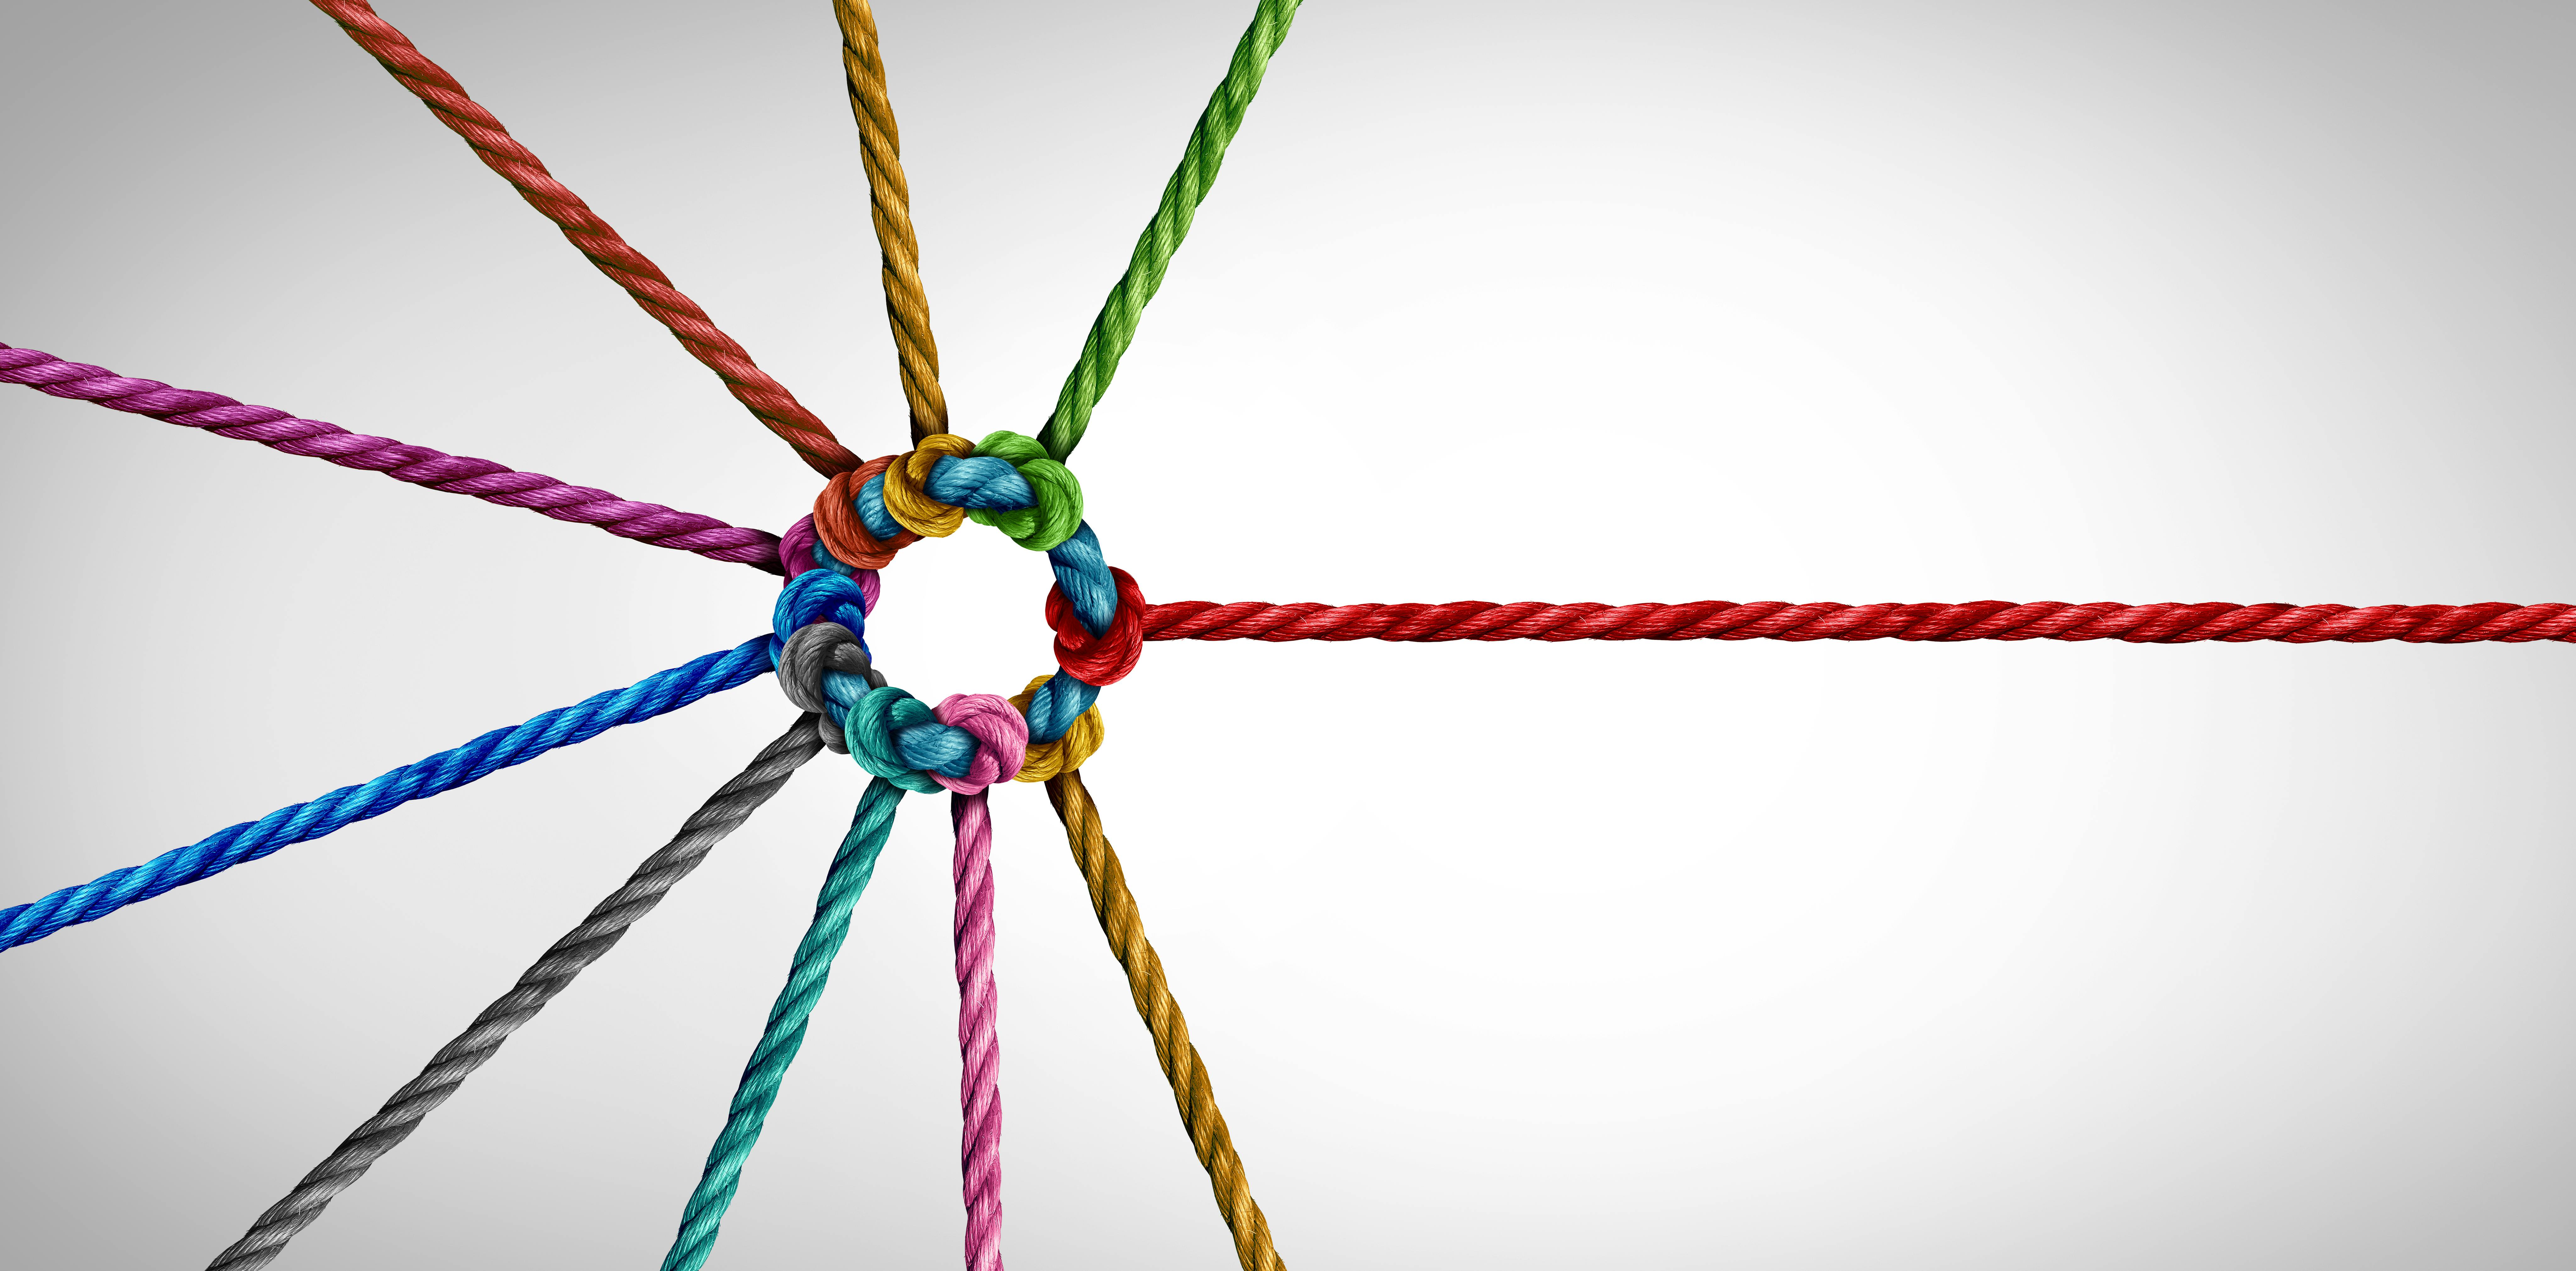 Colorful intertwined ropes form a circle.